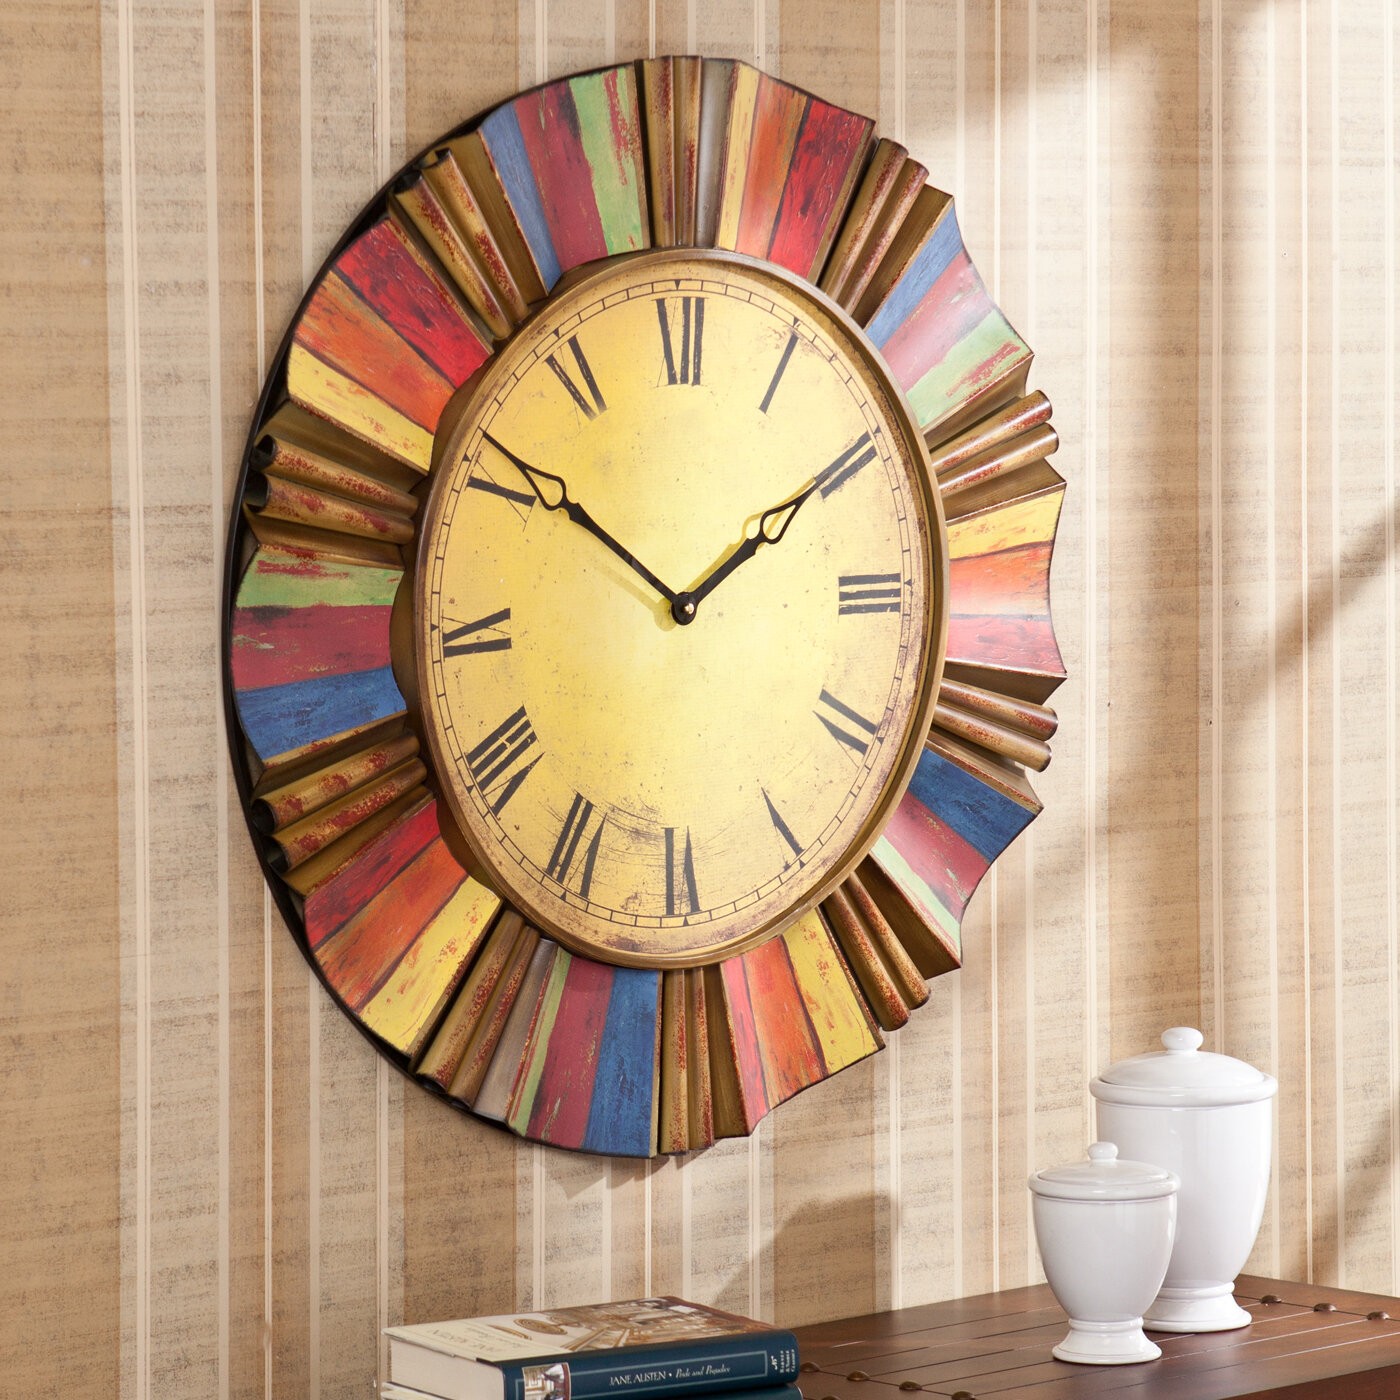 Oversized Wall Clock Rustic Metal Western Decor Vintage Colorful Art Hanging